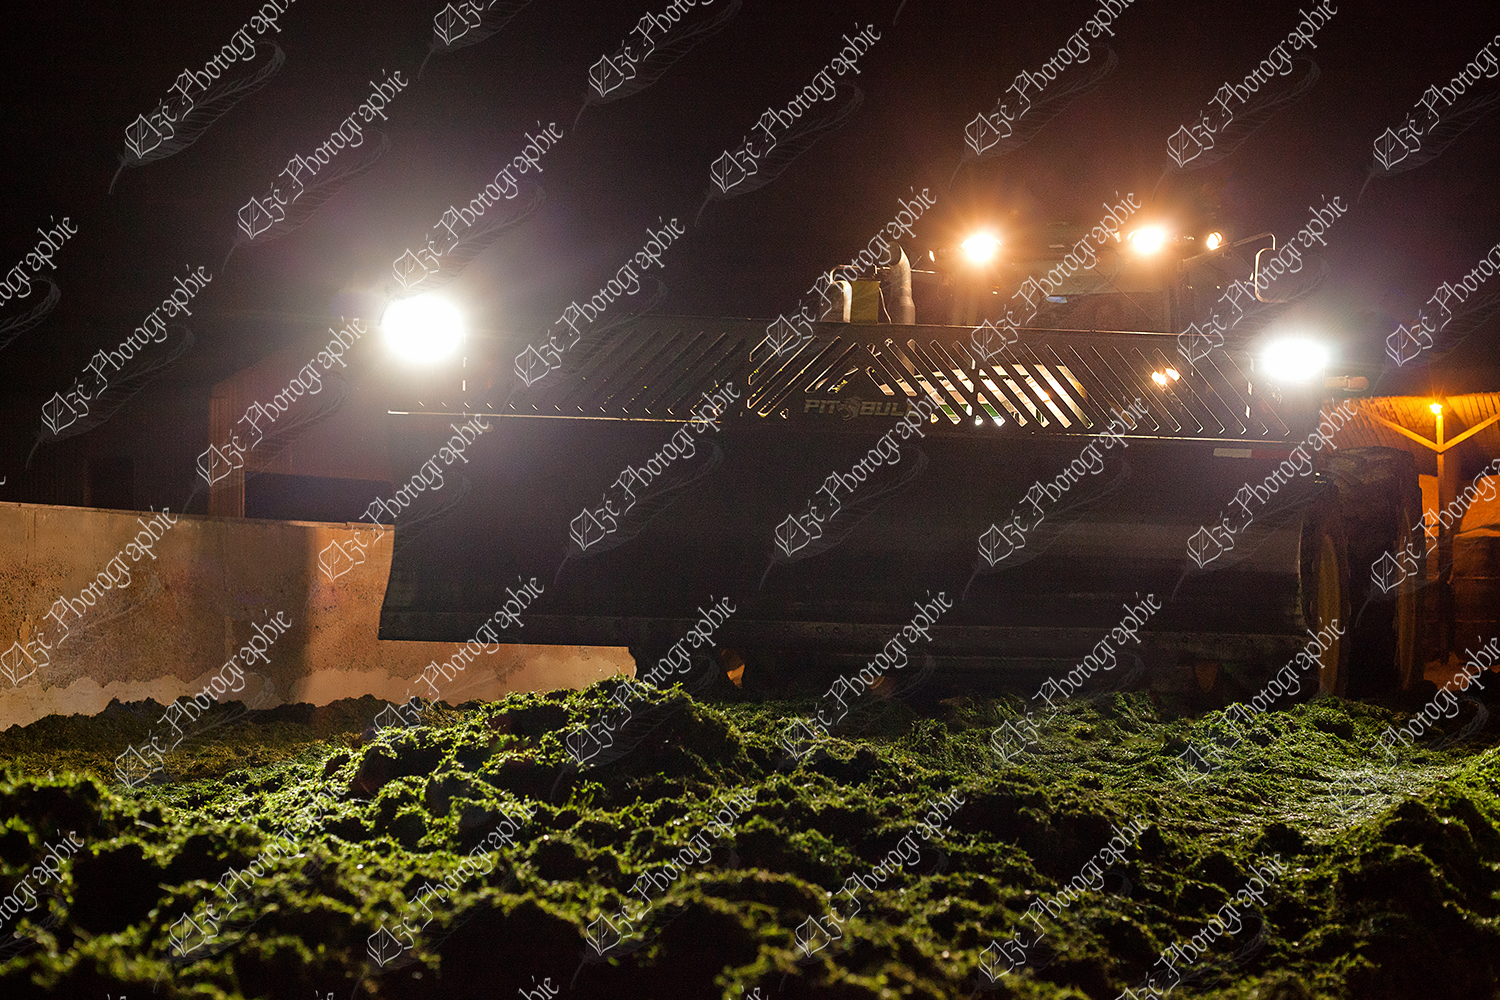 elze_photo_9765_compaction_machinerie_ensilage_tractor_grass